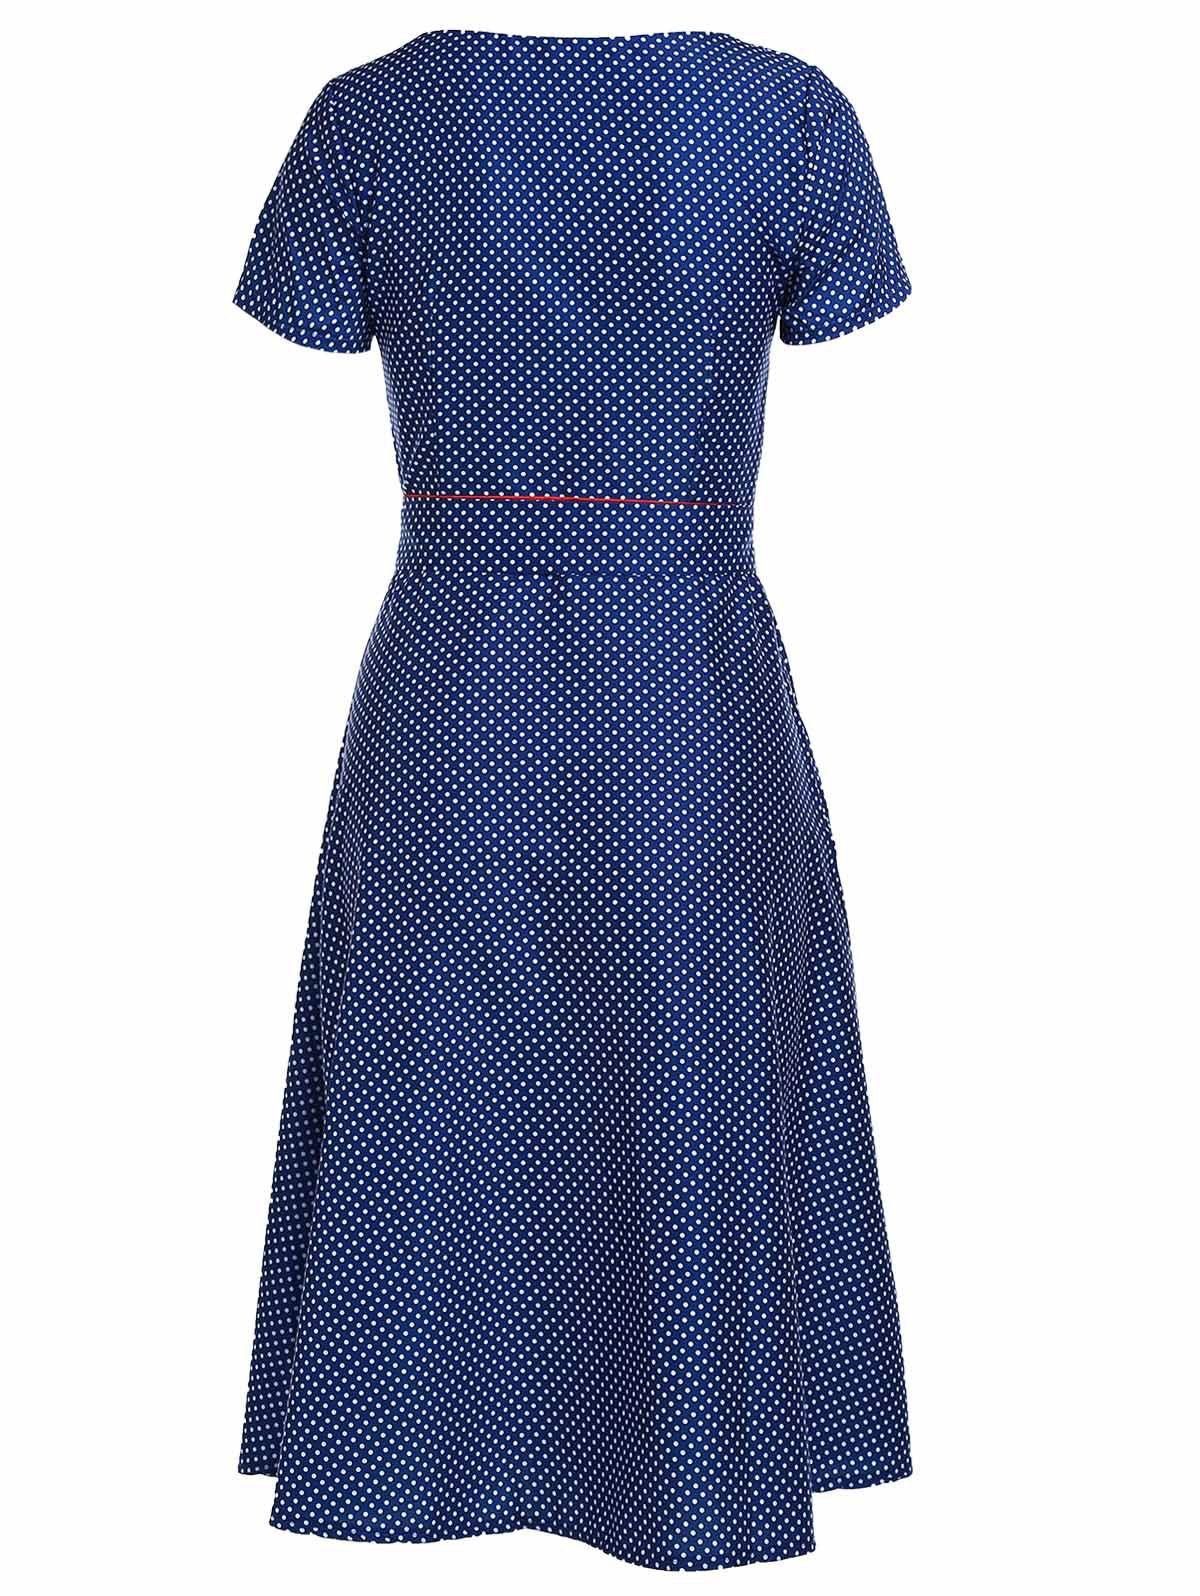 Romoti Open To Everything Navy Blue Dots Print Dress